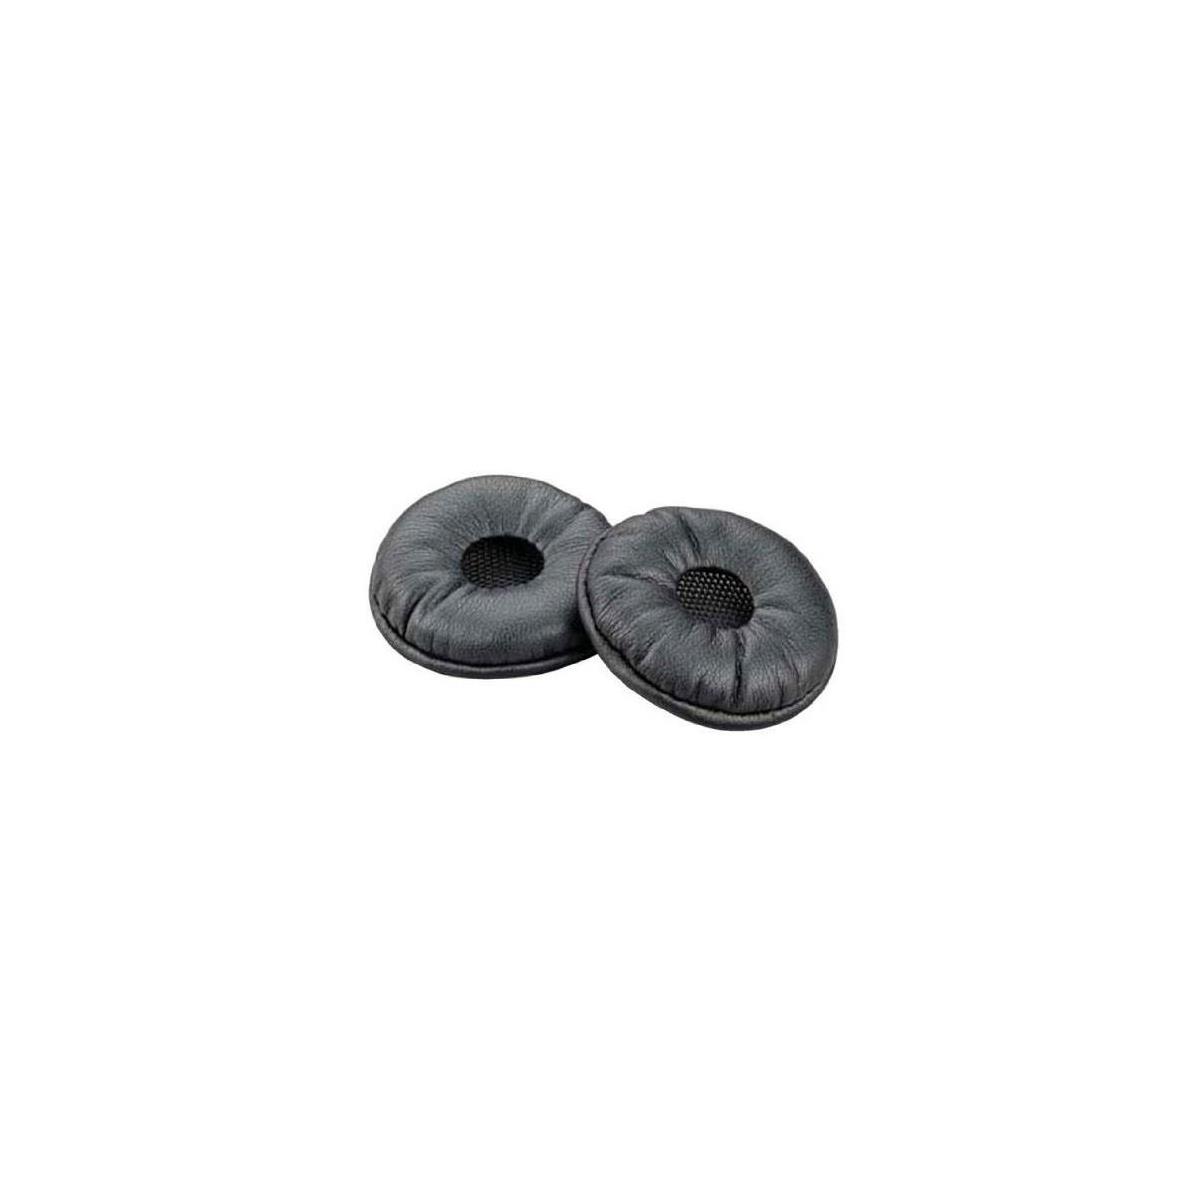 Photos - Other Sound & Hi-Fi Poly Plantronics Spare Ear Cushion for W745/W740/W440/CS540 Headset, 2 Pack 872 